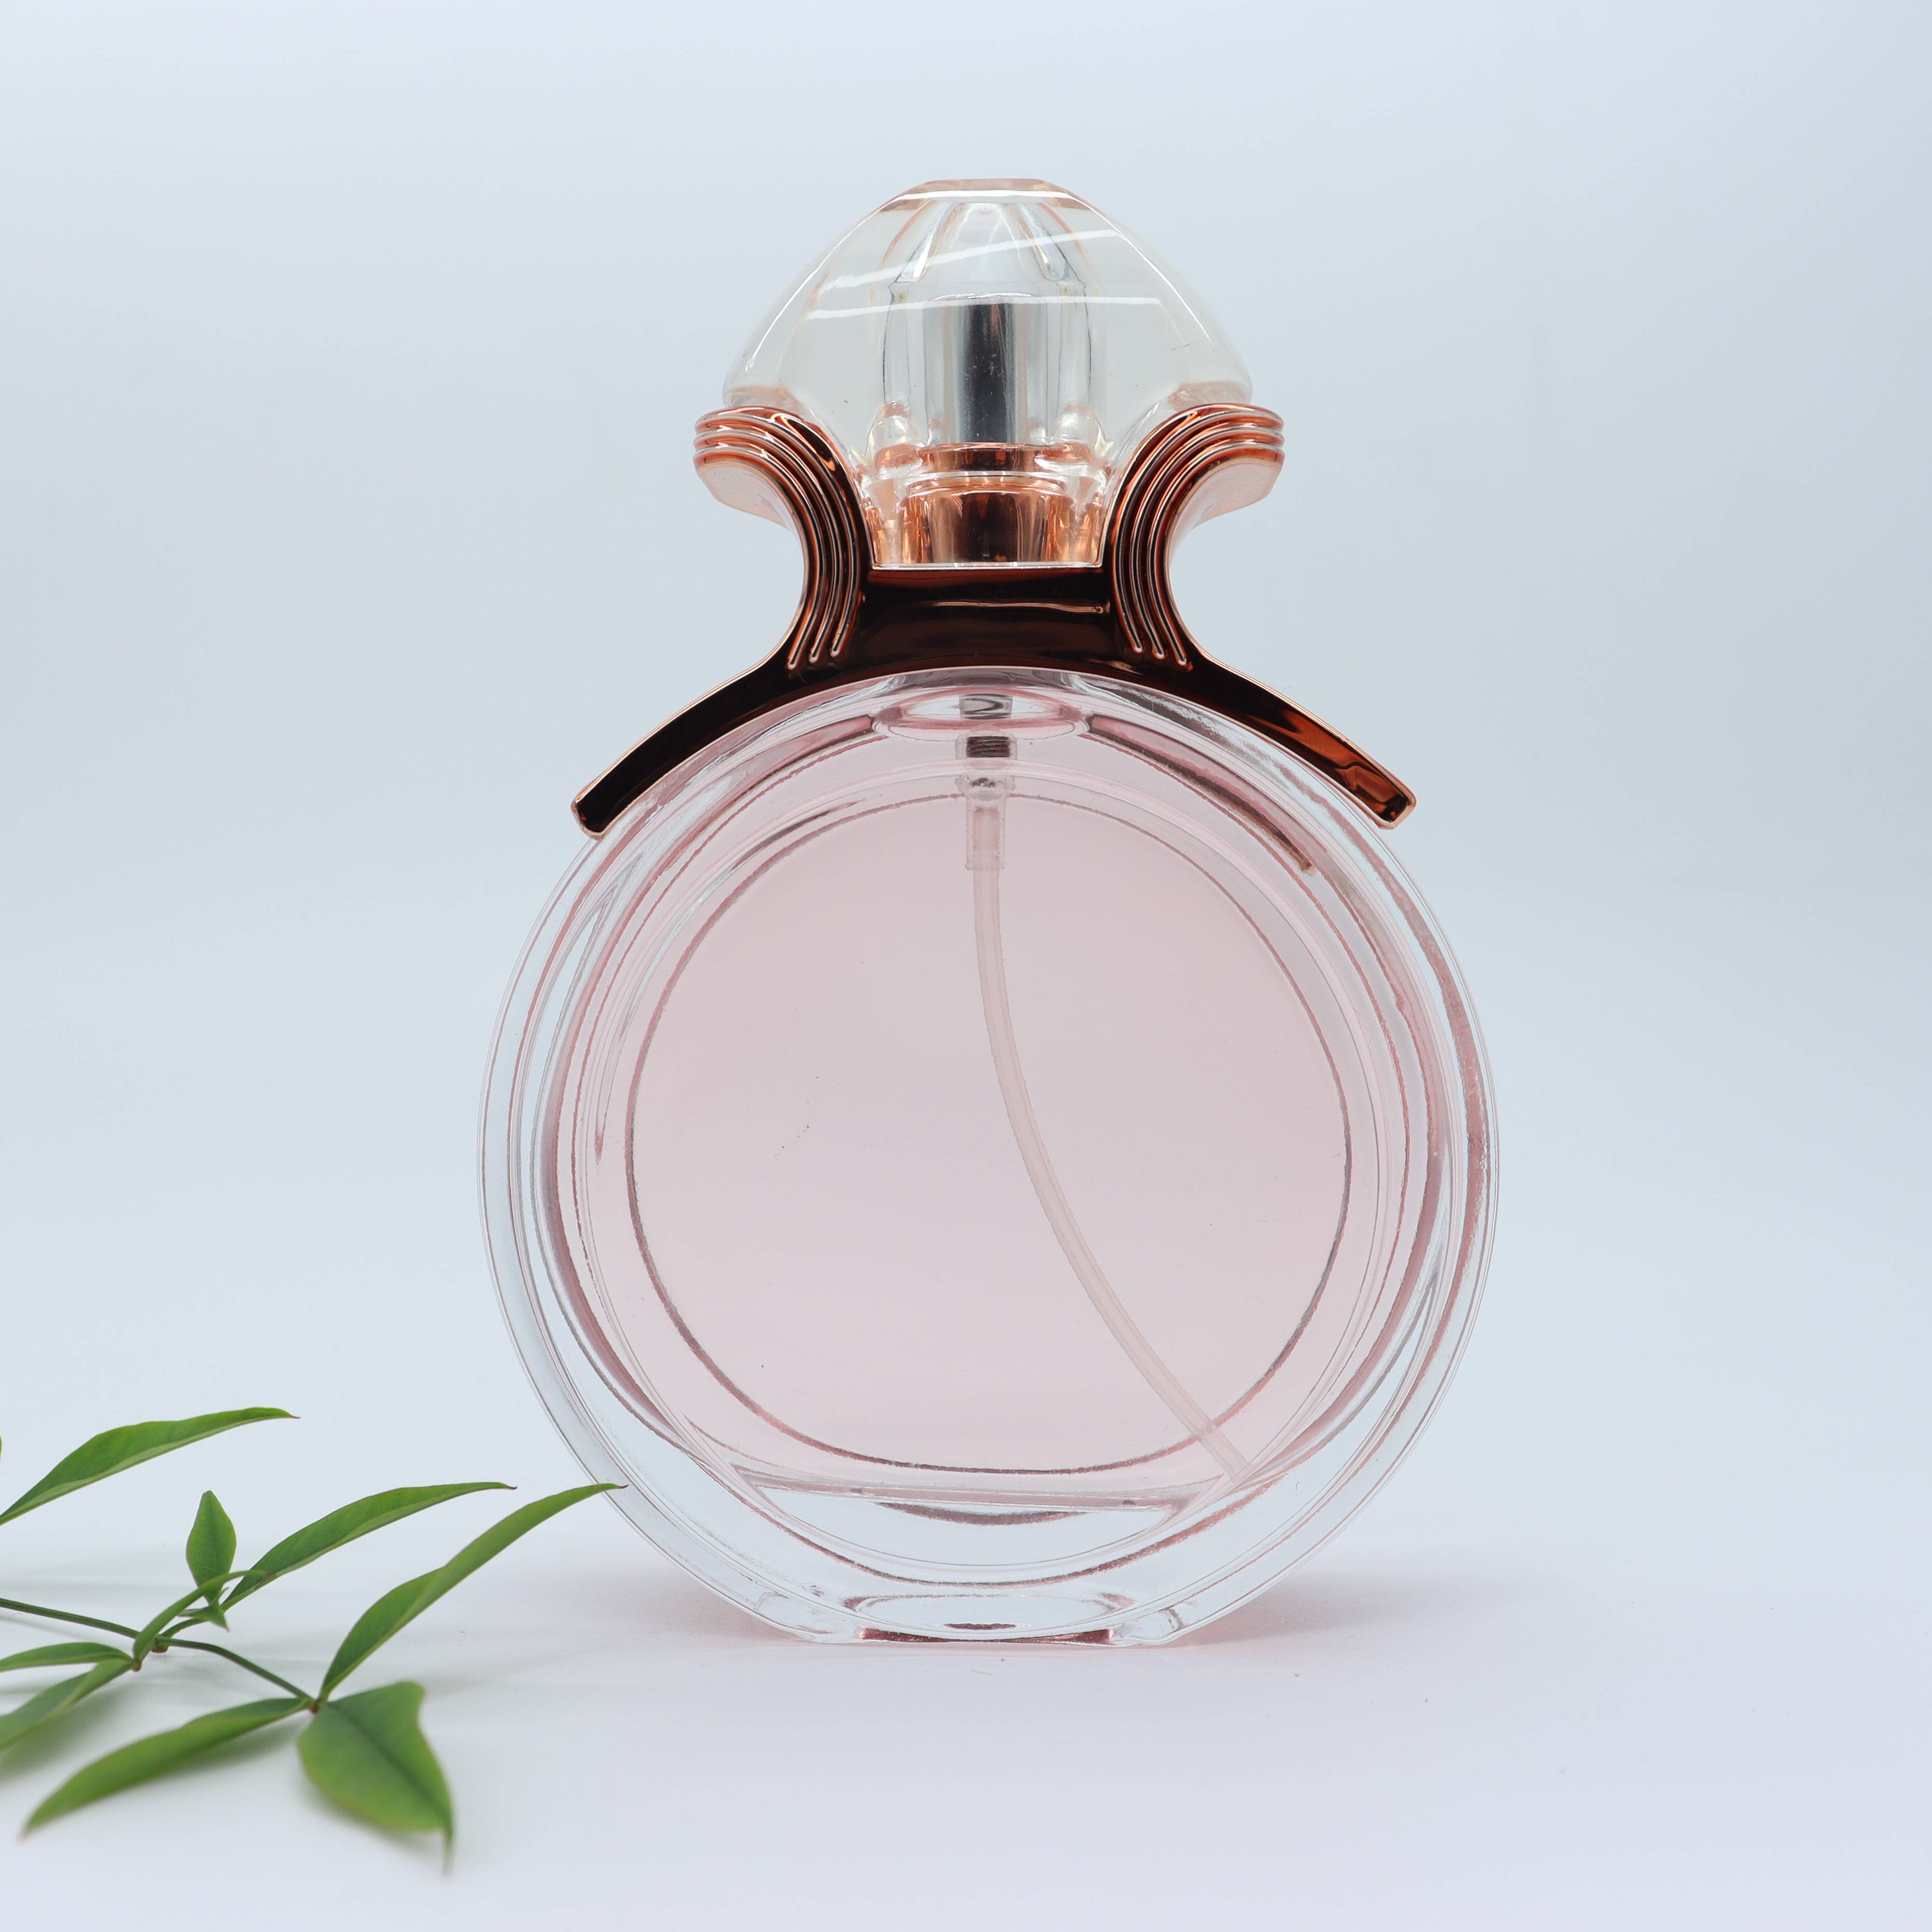 Cute round shape Luxury perfume bottles factory manufacture supply 55ml glass bottle